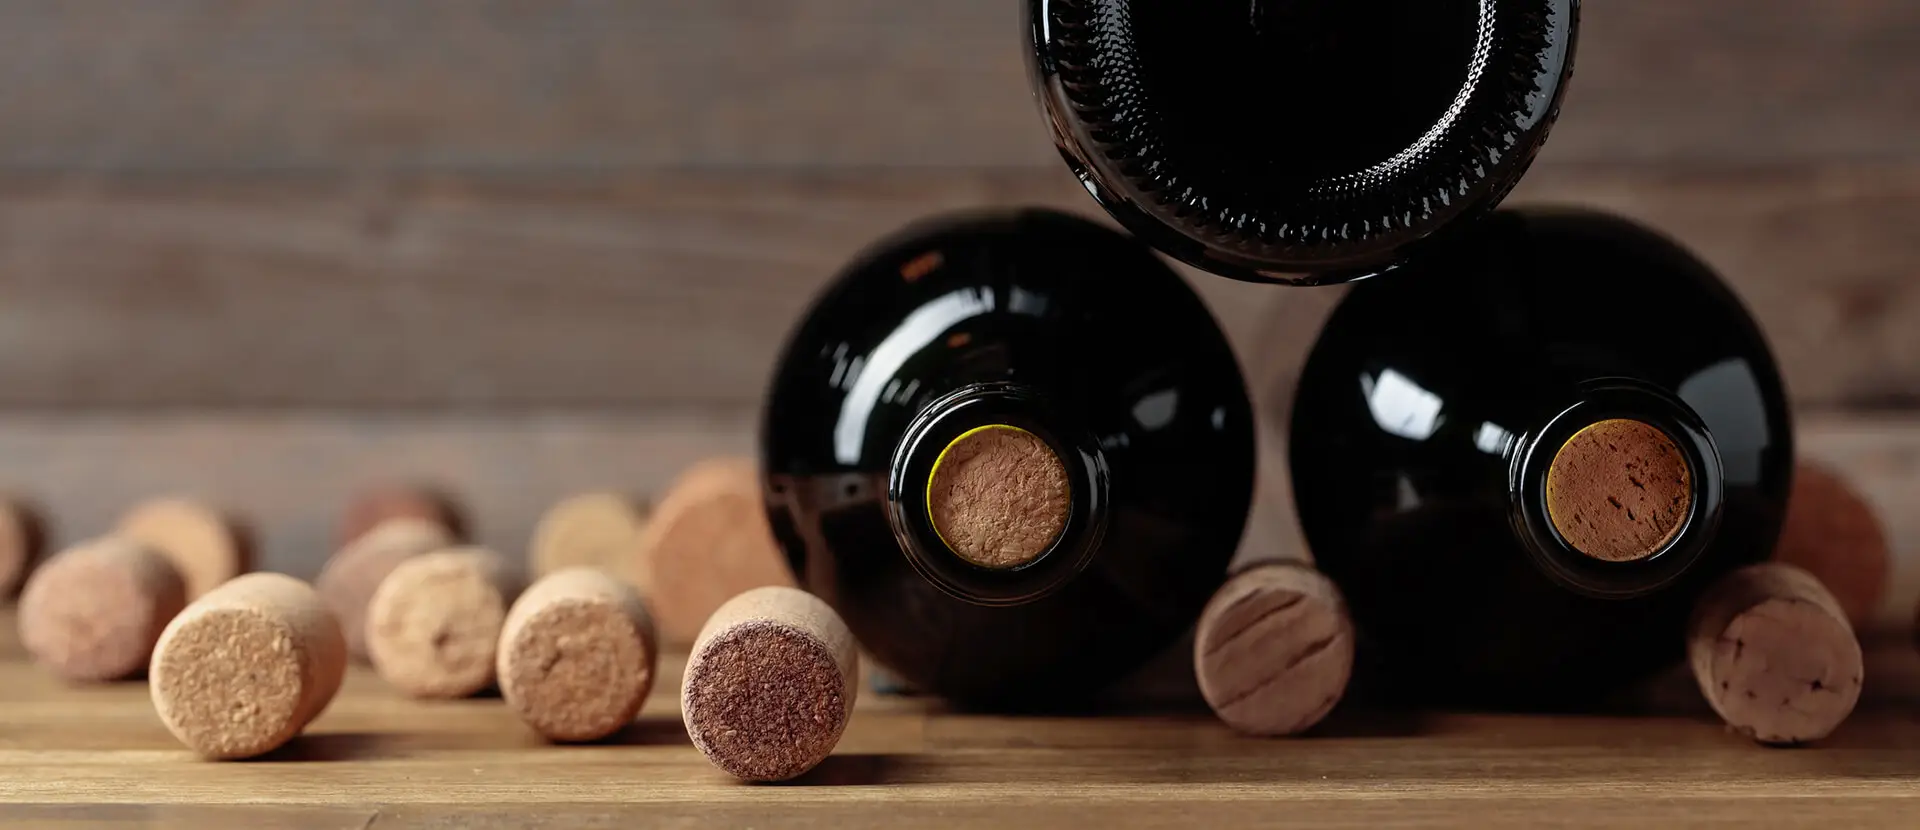 The 8 Best Wine Stoppers